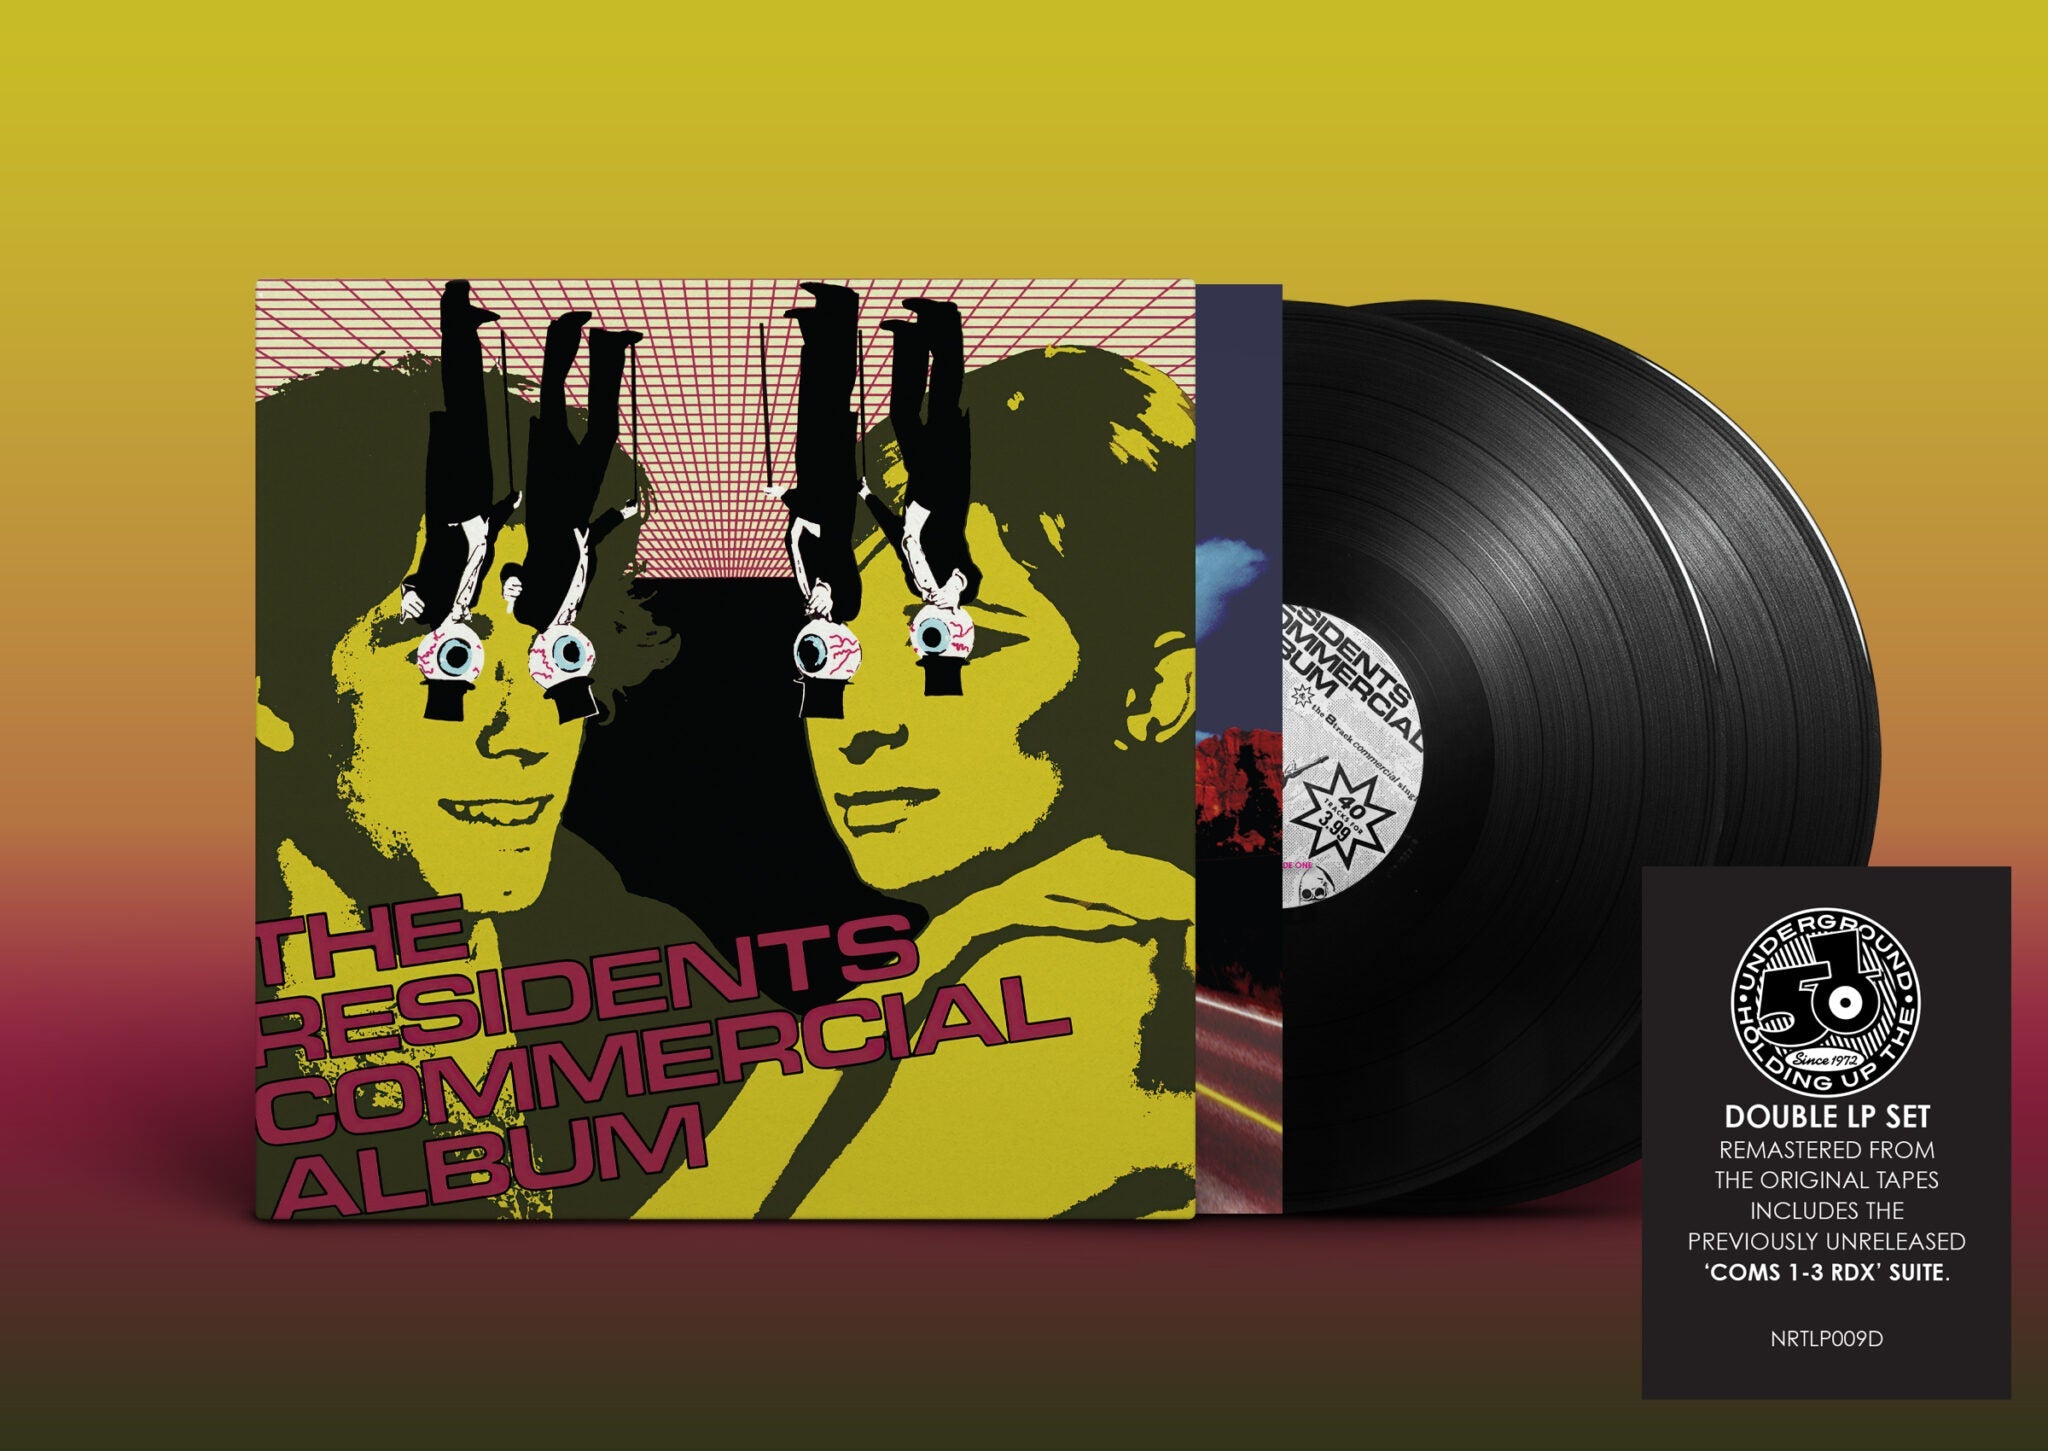 THE RESIDENTS - Commercial Album - pREServed Edition (w/ Booklet) - 2LP - Vinyl [JUL 7]